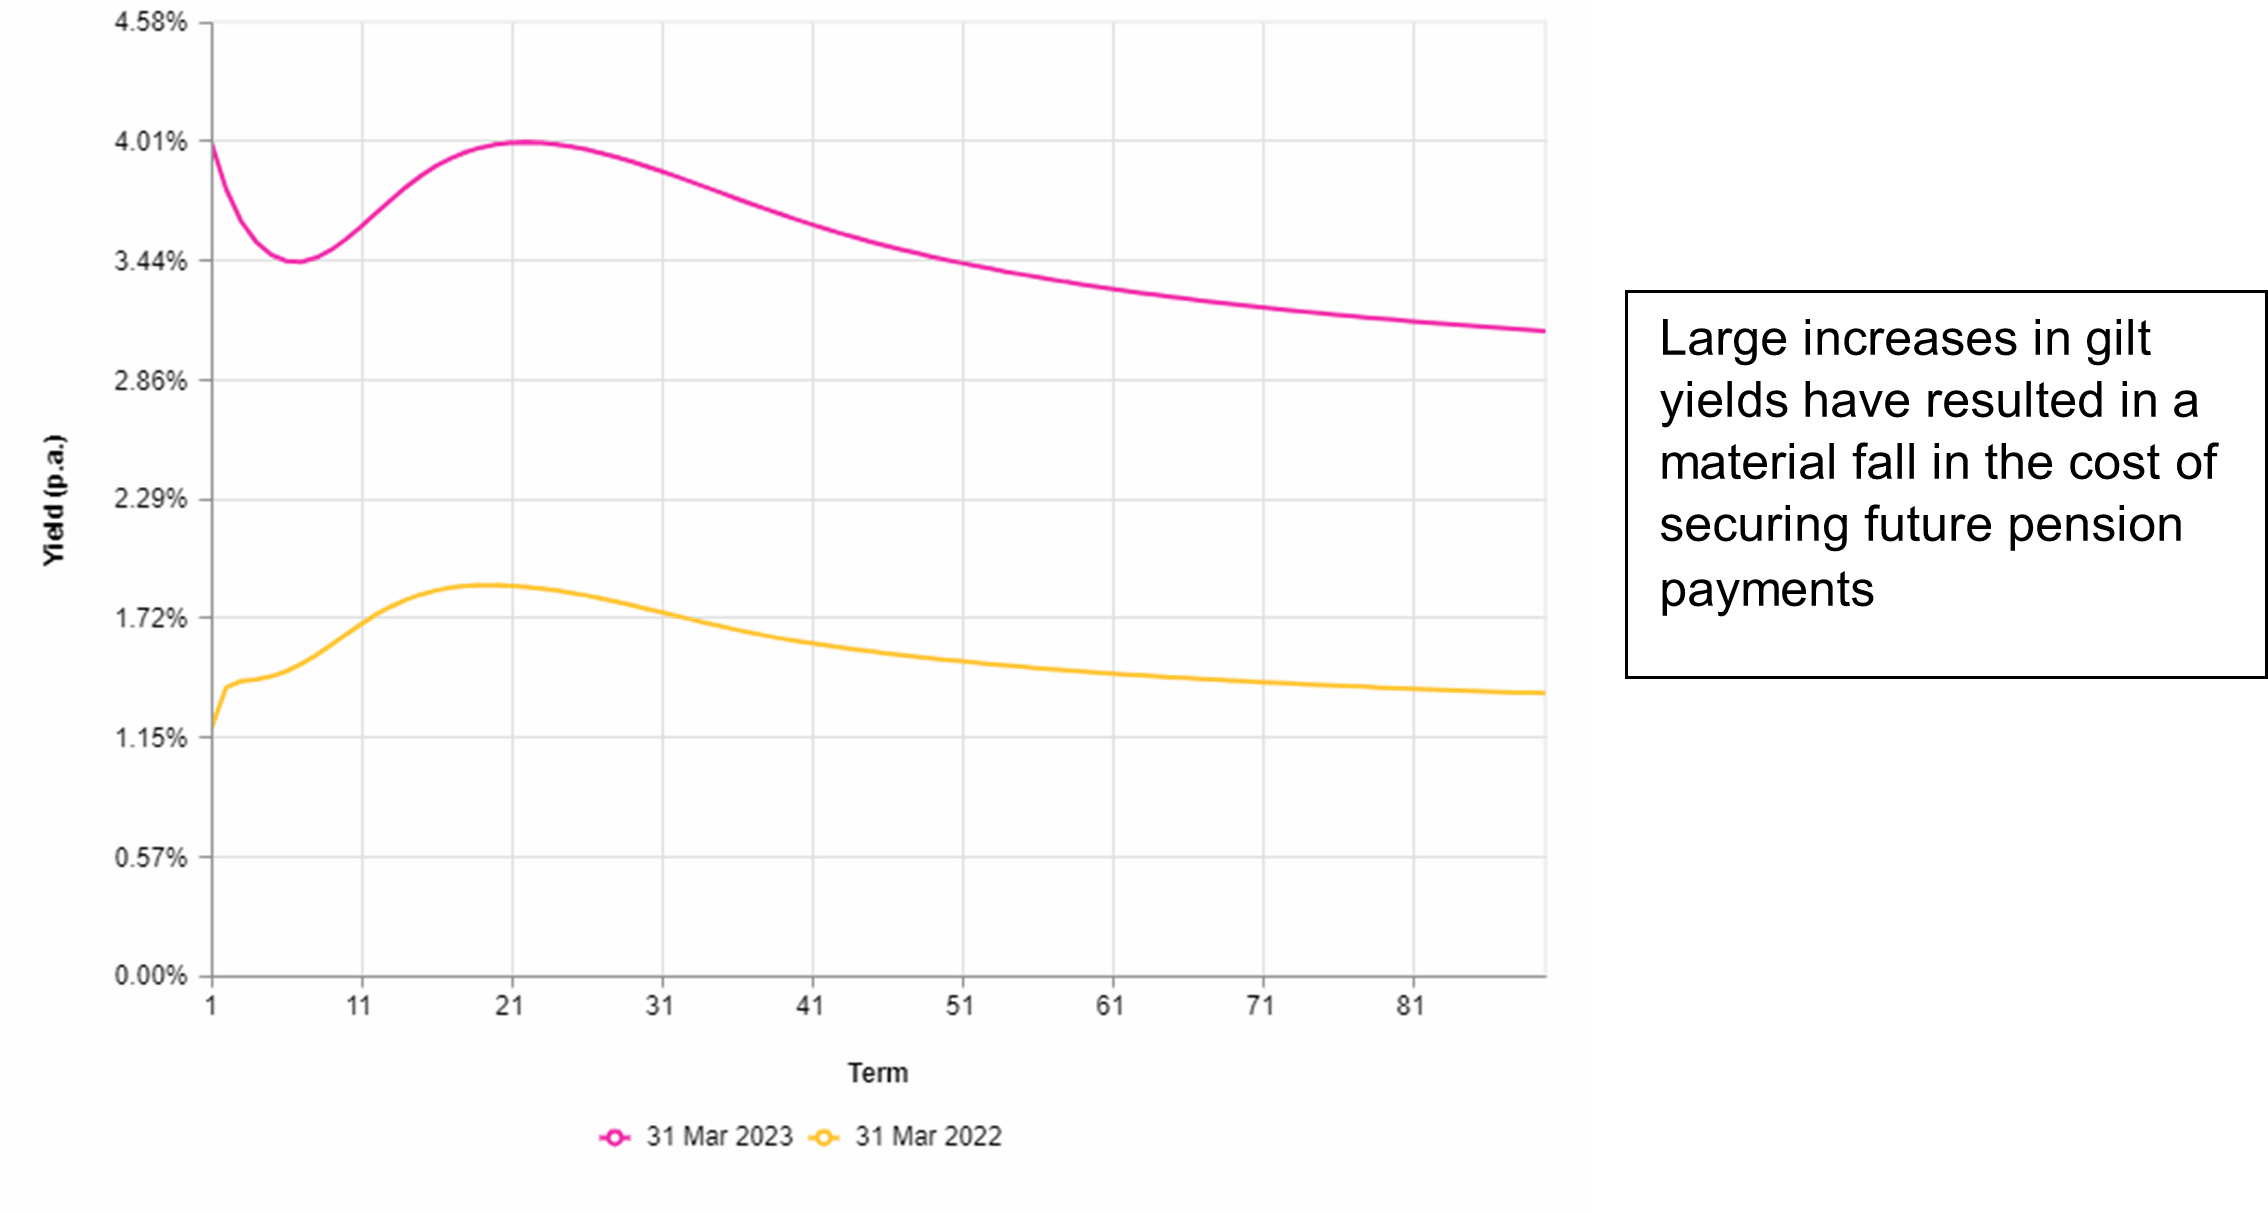 Large increases in gilt yields have resulted in a material fall in the cost of securing future pension payments